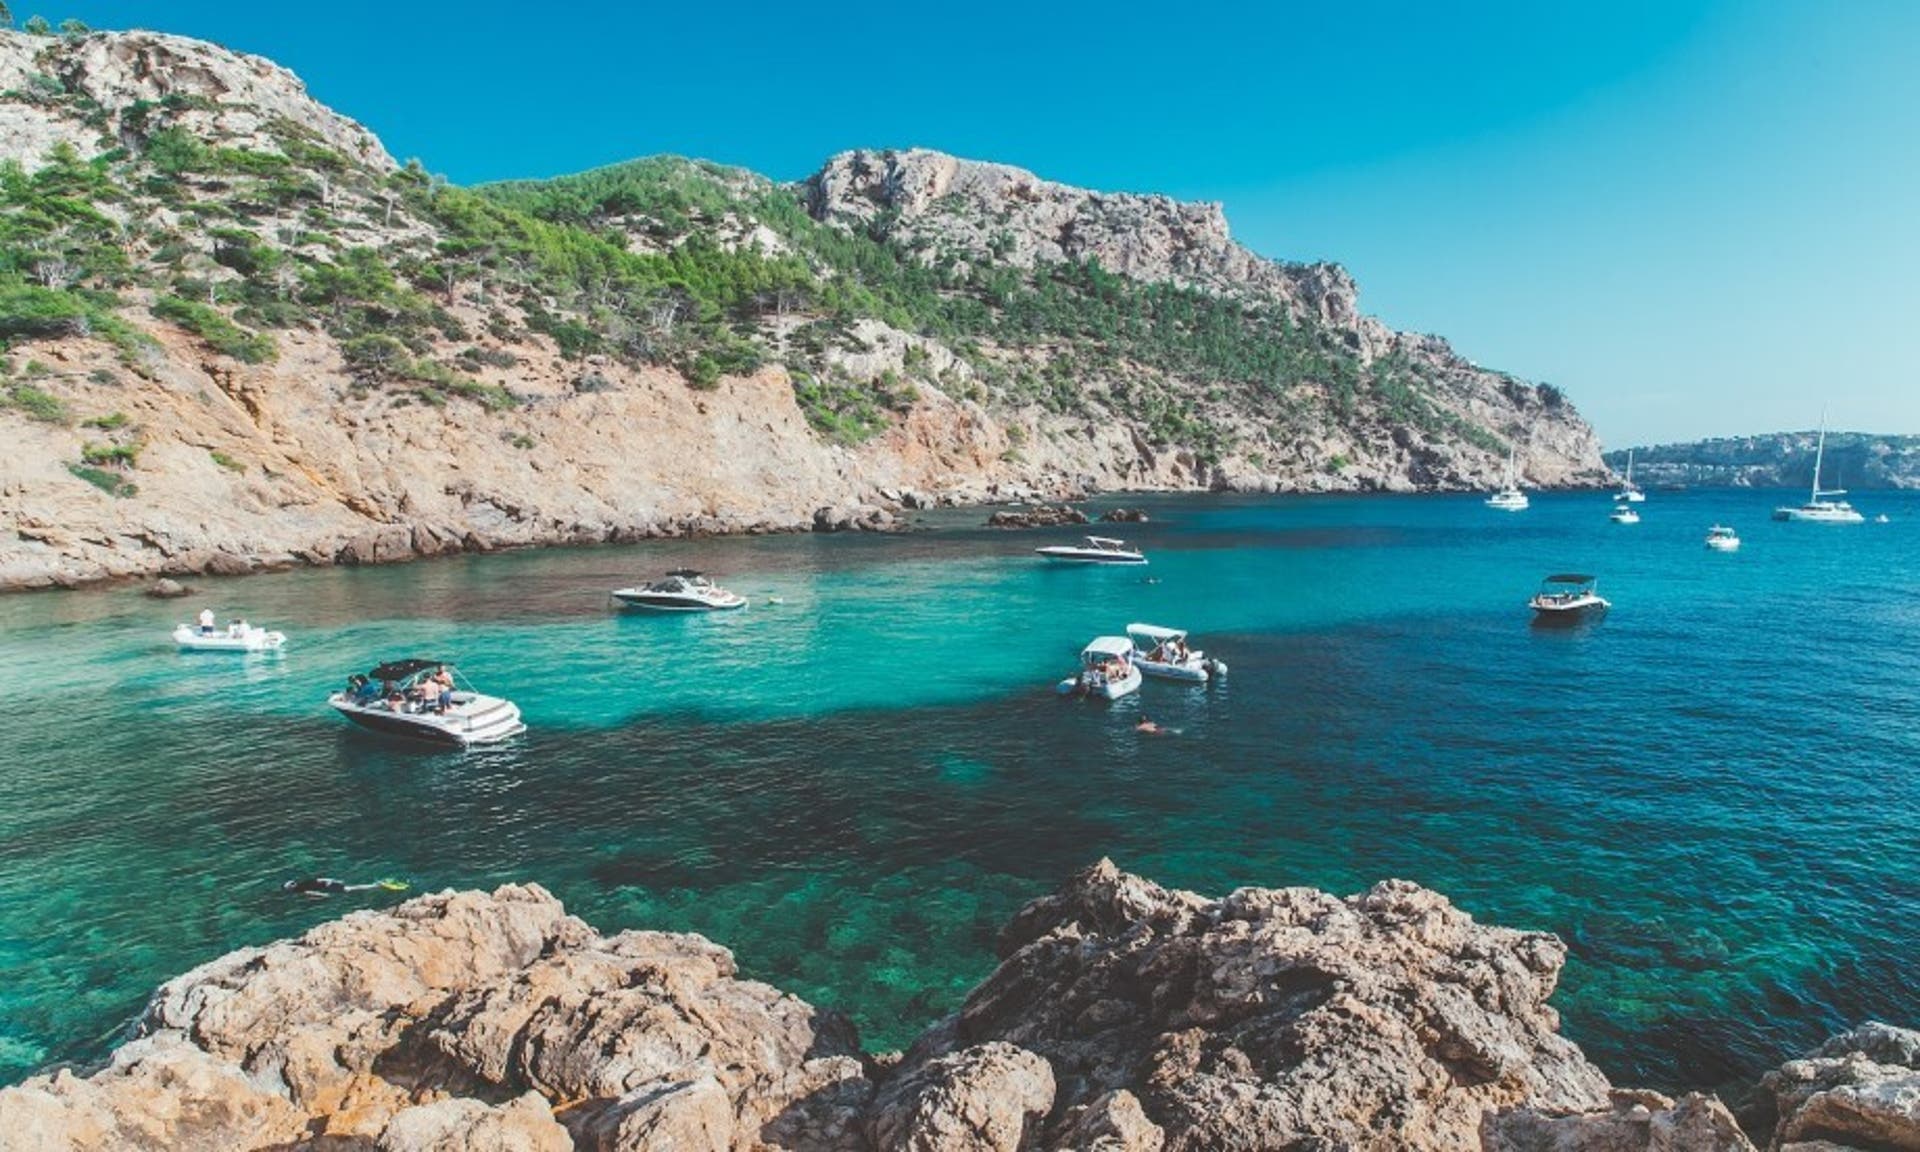  image of a coastal alcove in Mallorca, with idyllic light blue sea and people jumping off moored boats into the water 